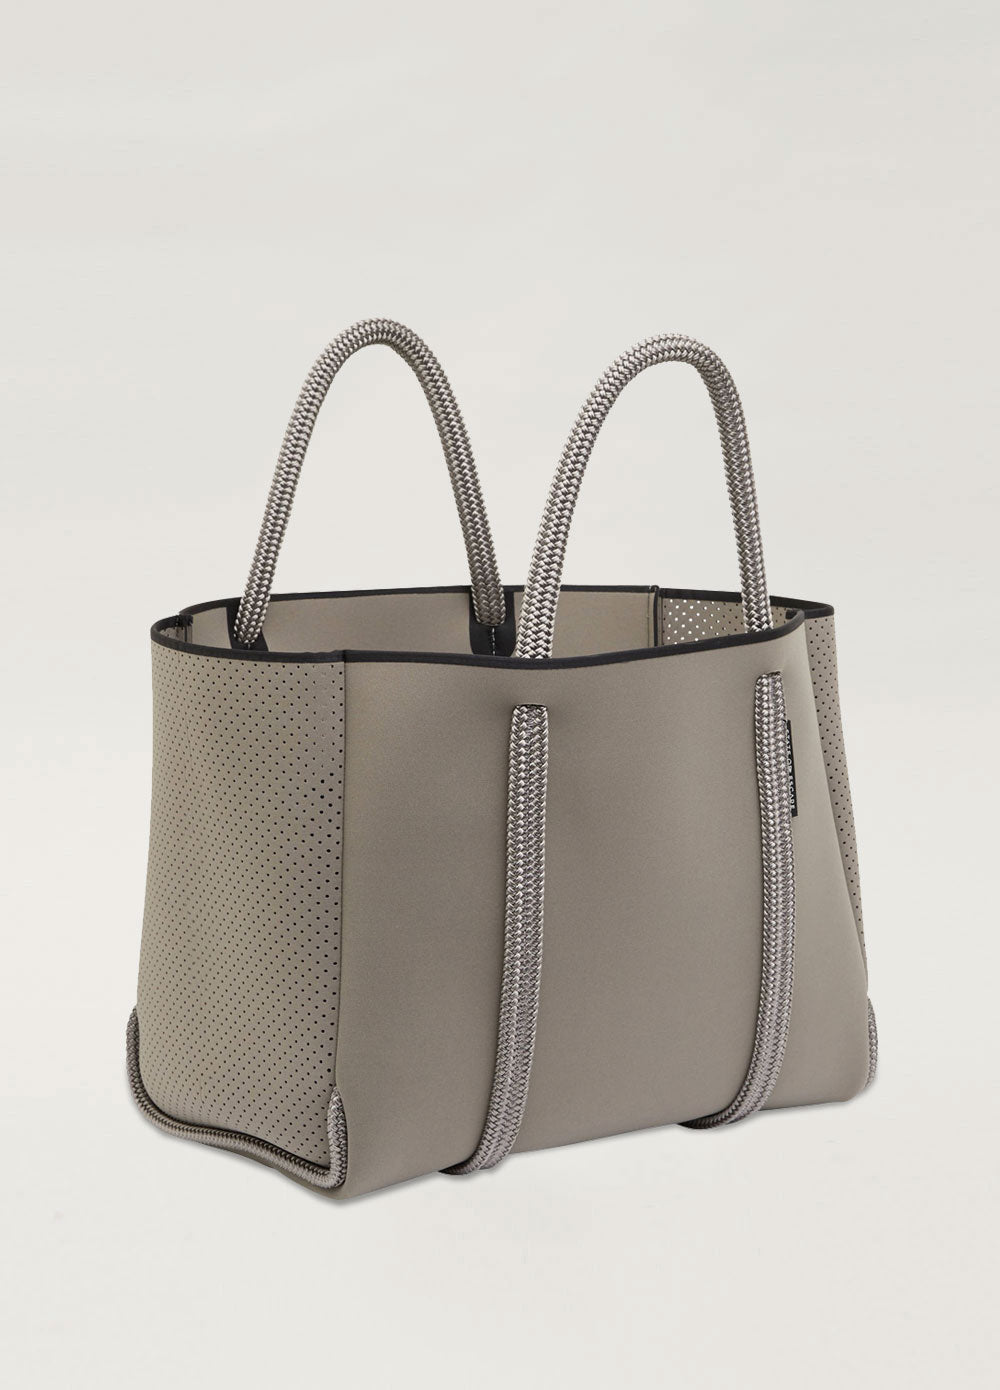 City East West Tote